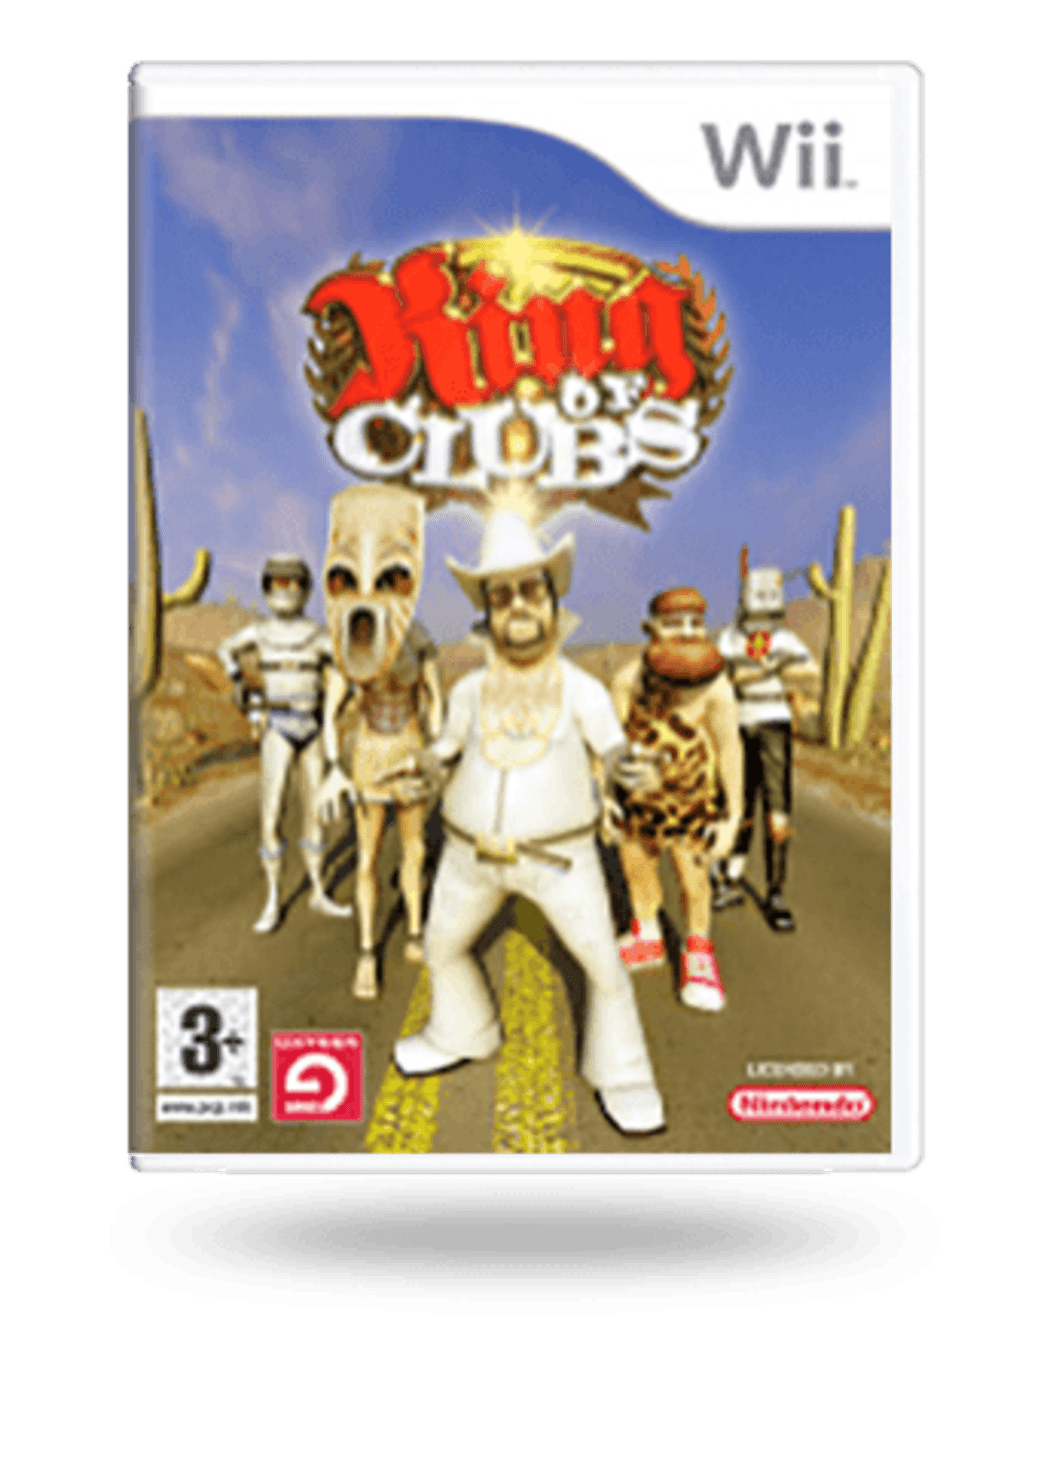 Club Nintendo Colombia. Wii Pitfall: the big Adventure. King of Clubs (Wii). Nintendo king